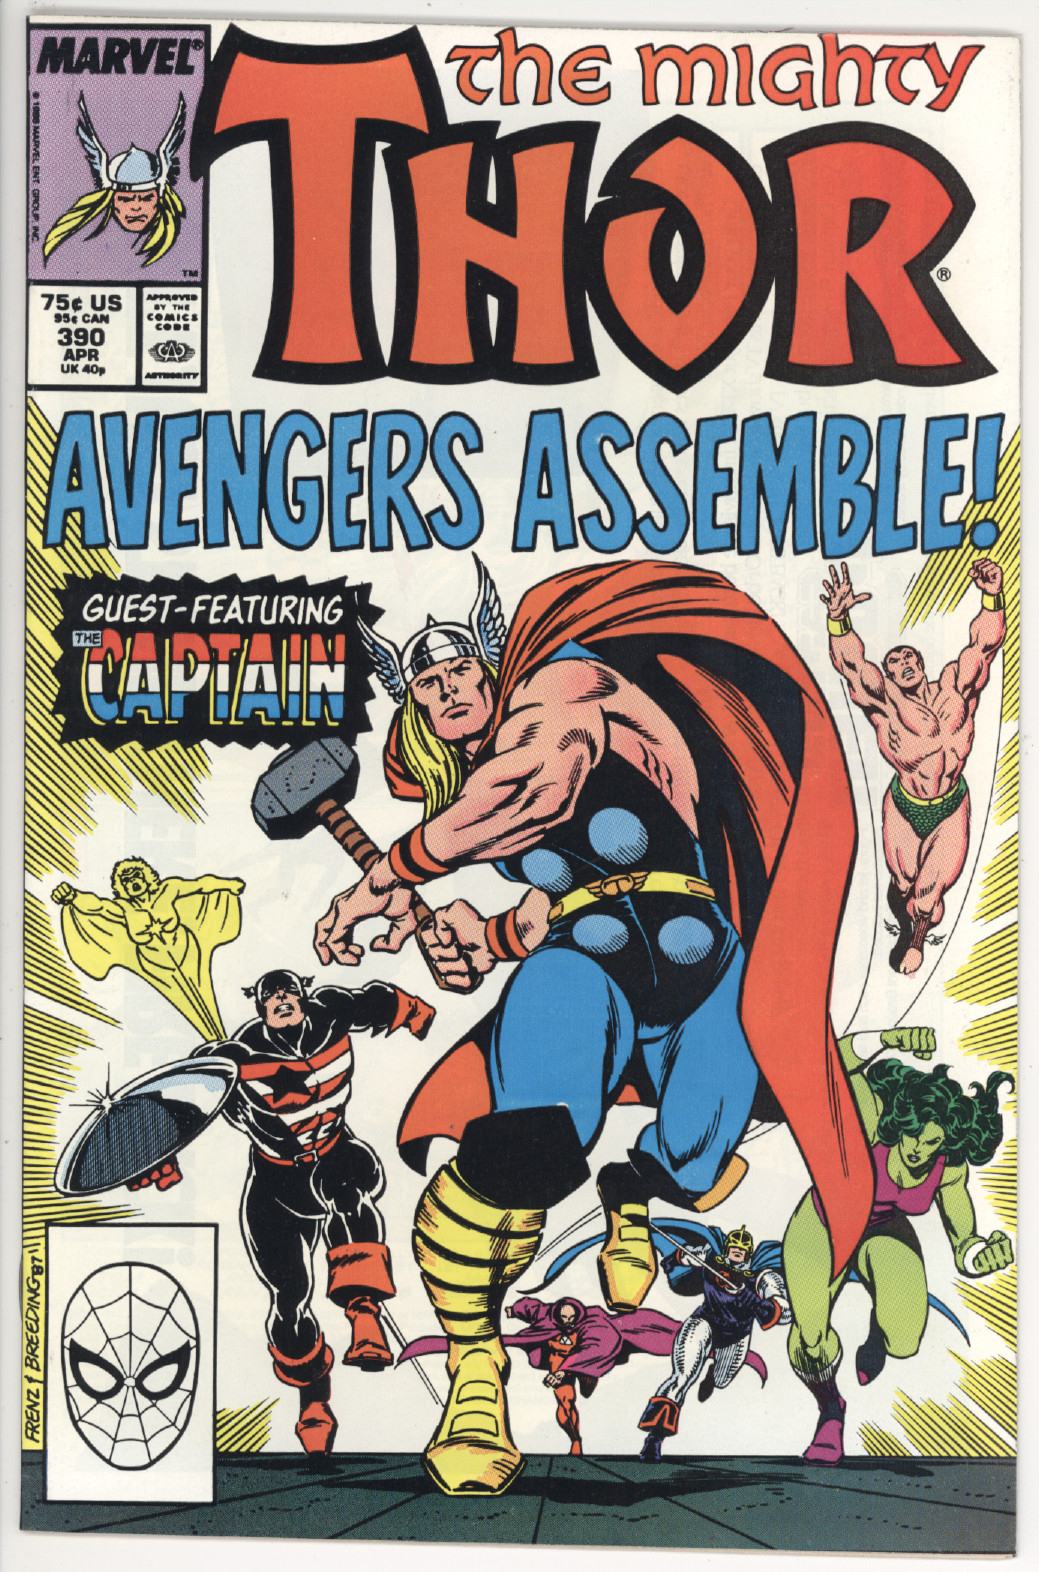 Thor #390 front